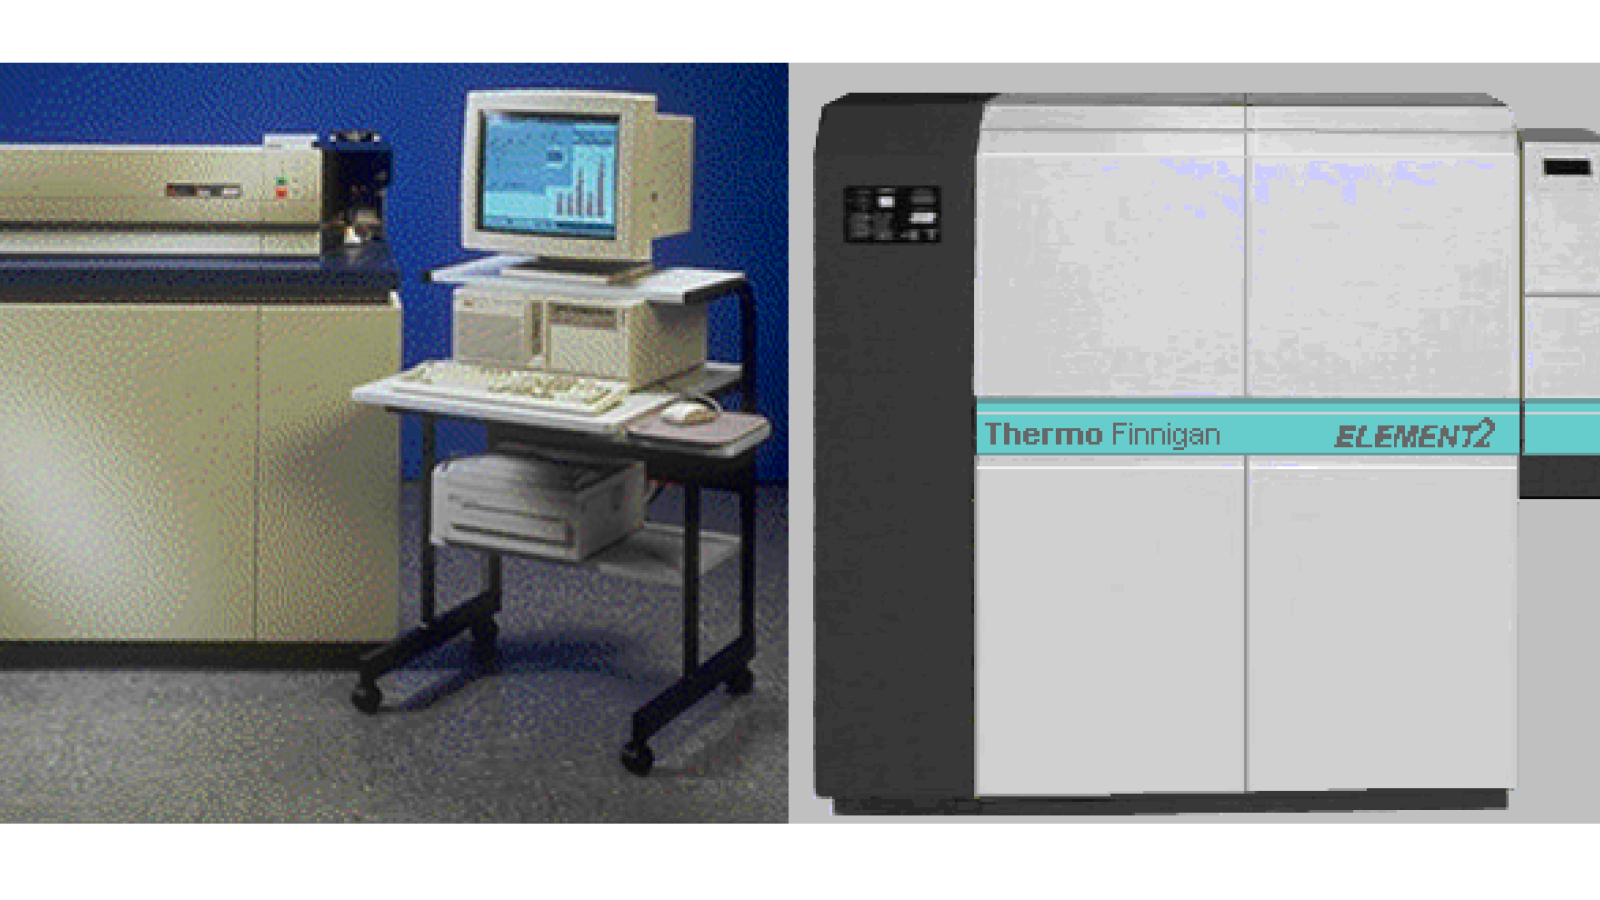 The Perkin-Elmer Sciex ELAN 6000 (left) and the ThermoFinnigan Element 2 (right).